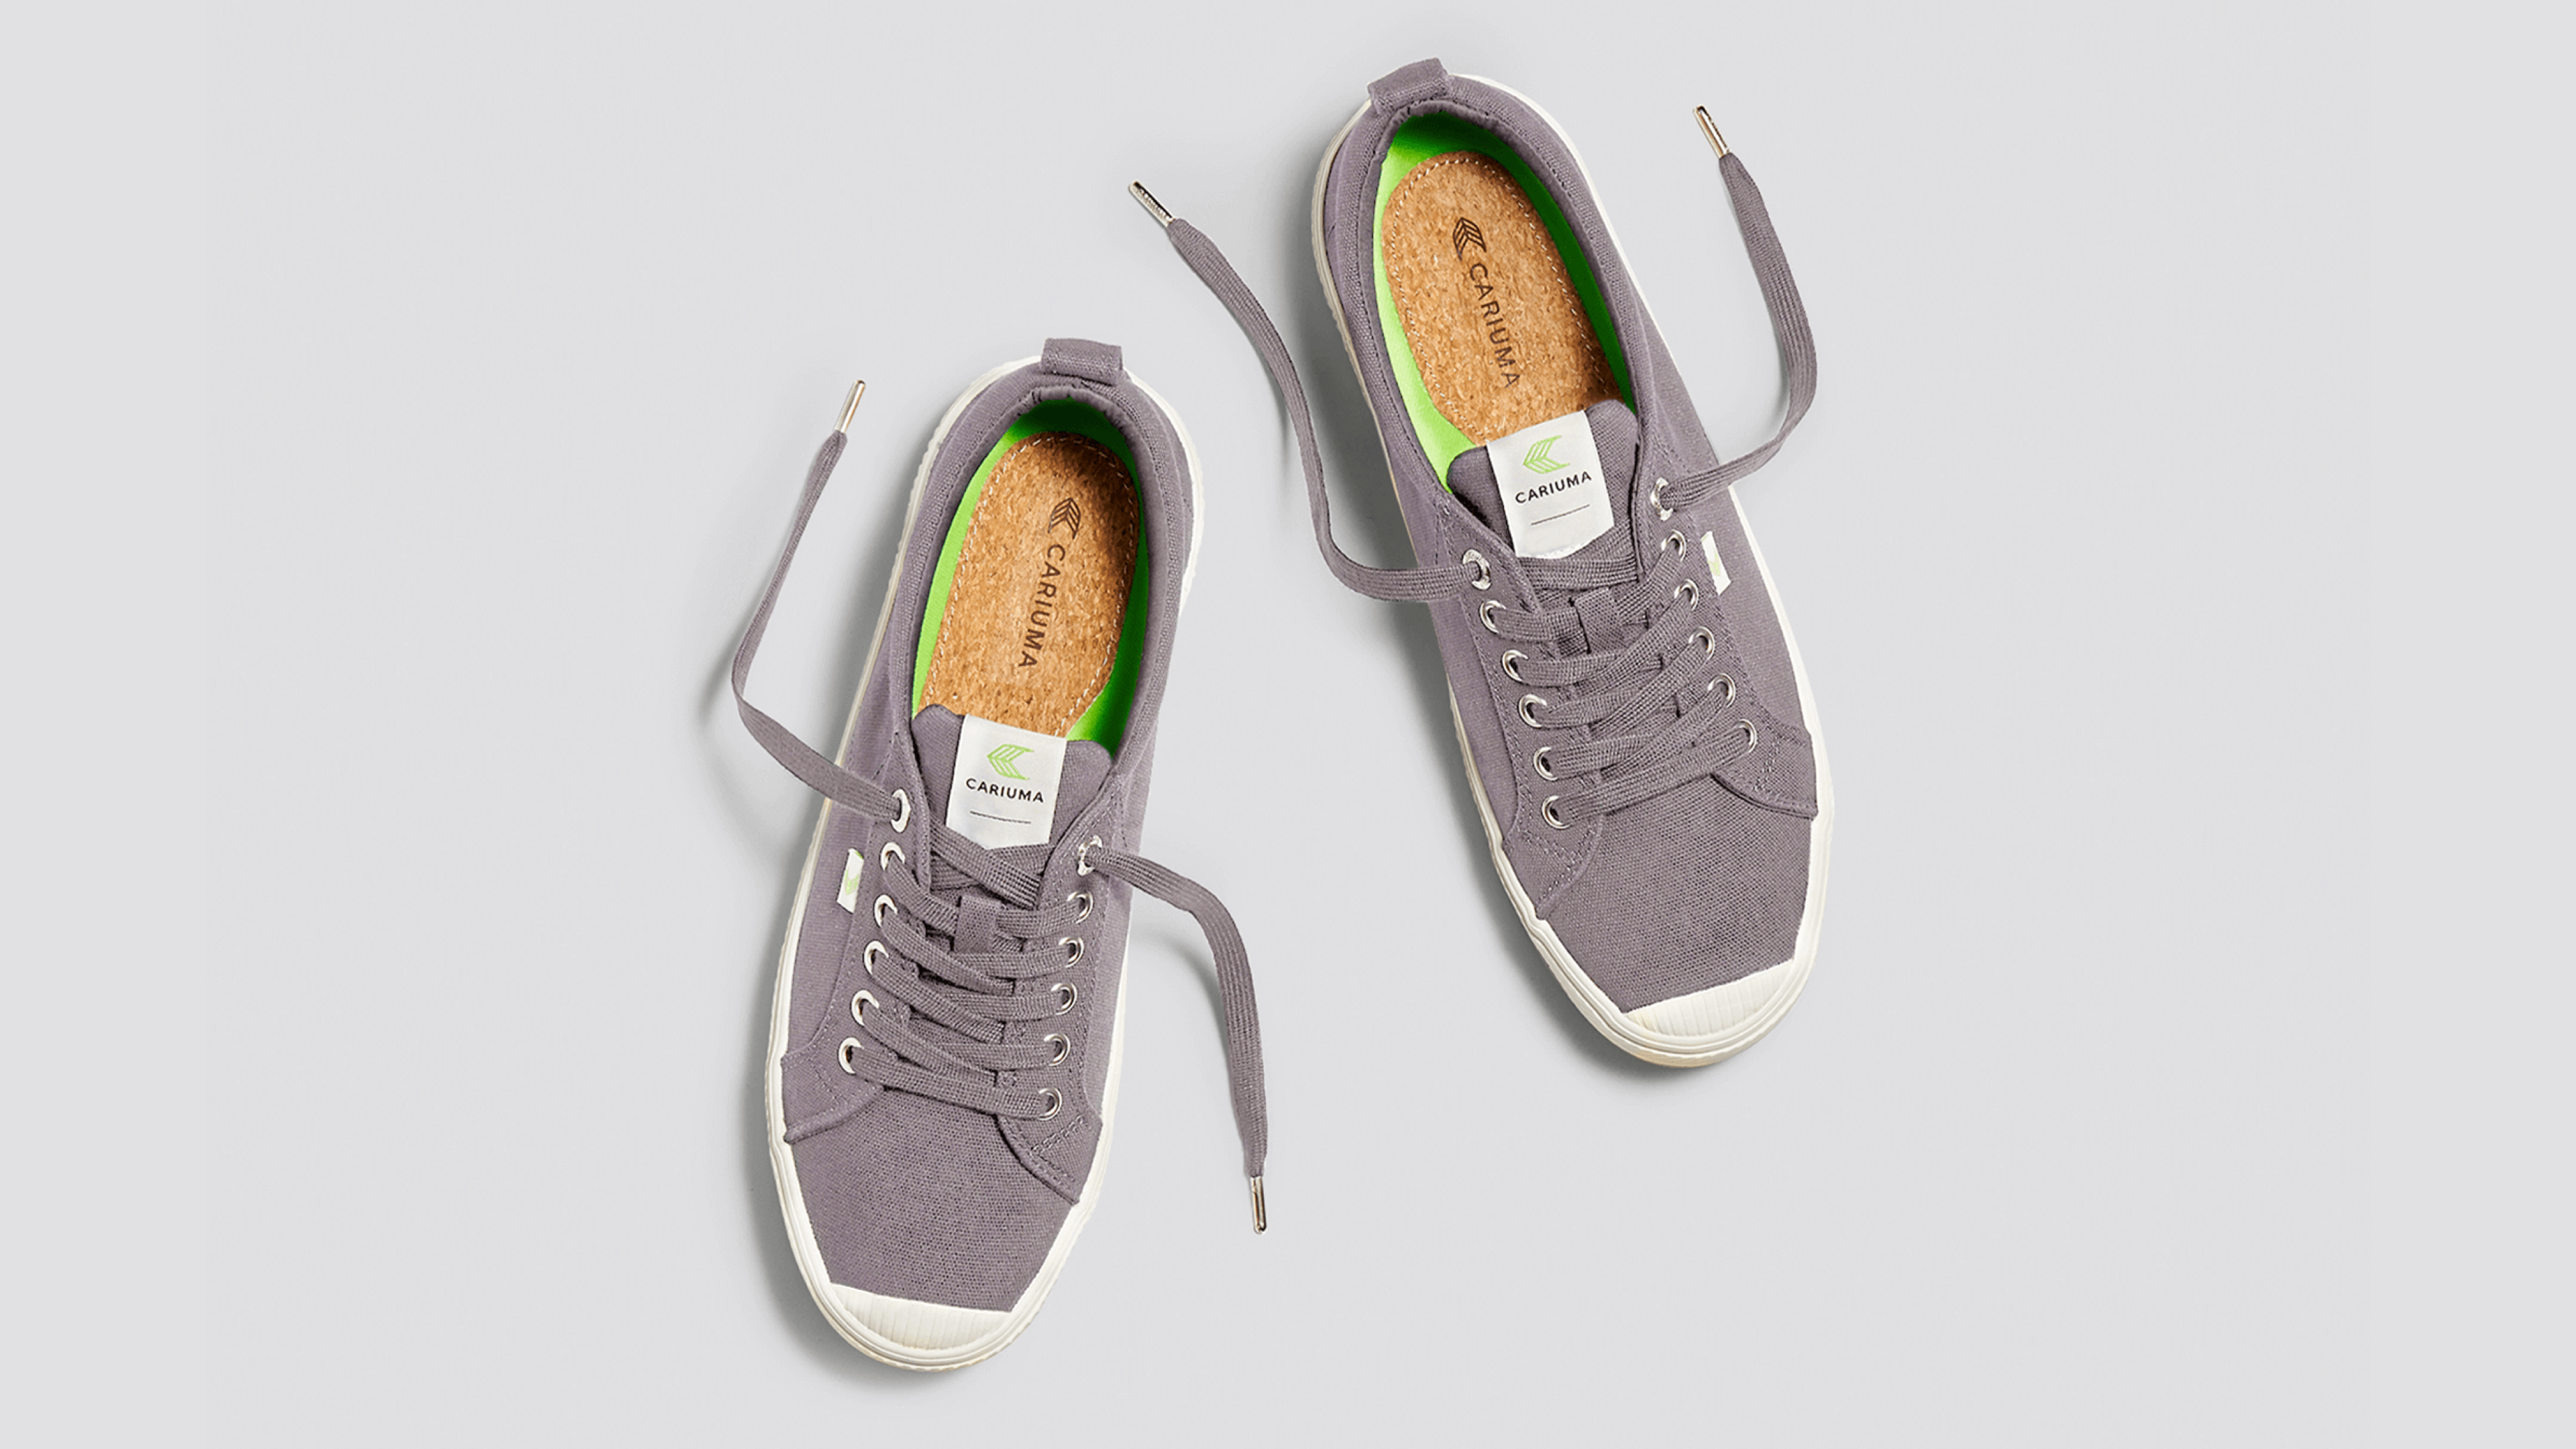 Super comfy canvas kicks that go with everything…